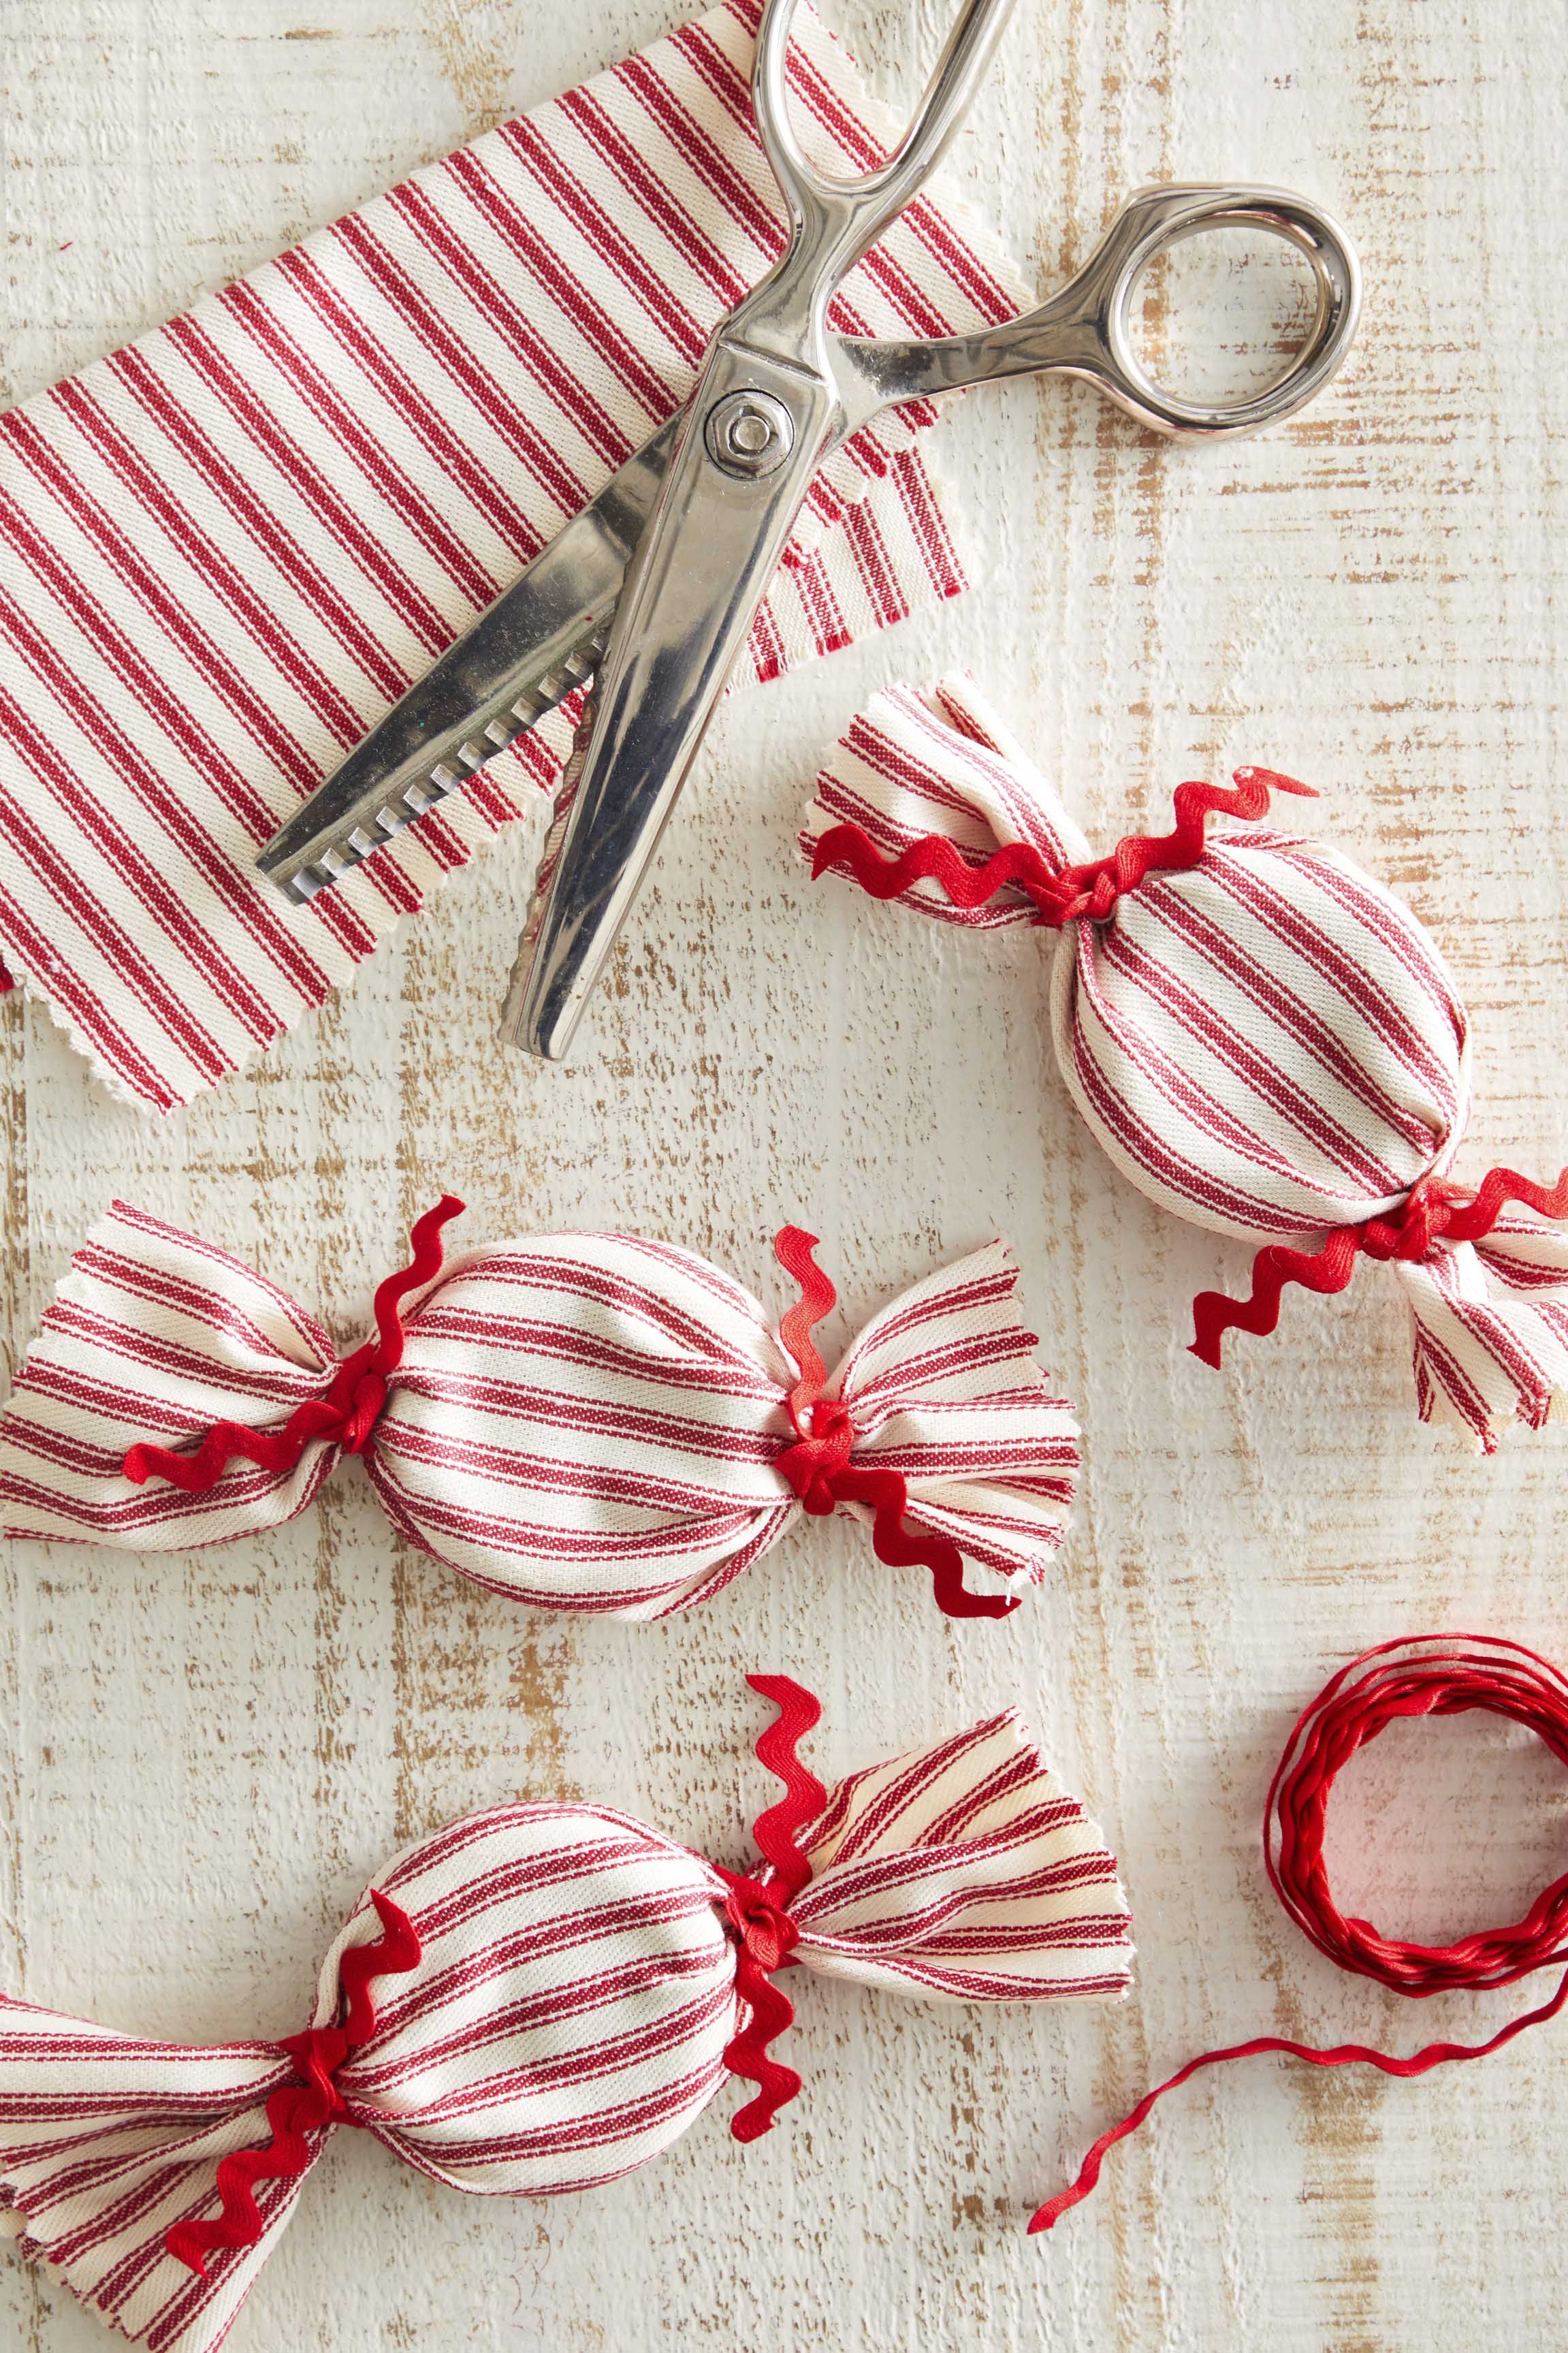 25 Quick & Easy Homemade Gifts for the Not-So-Crafty